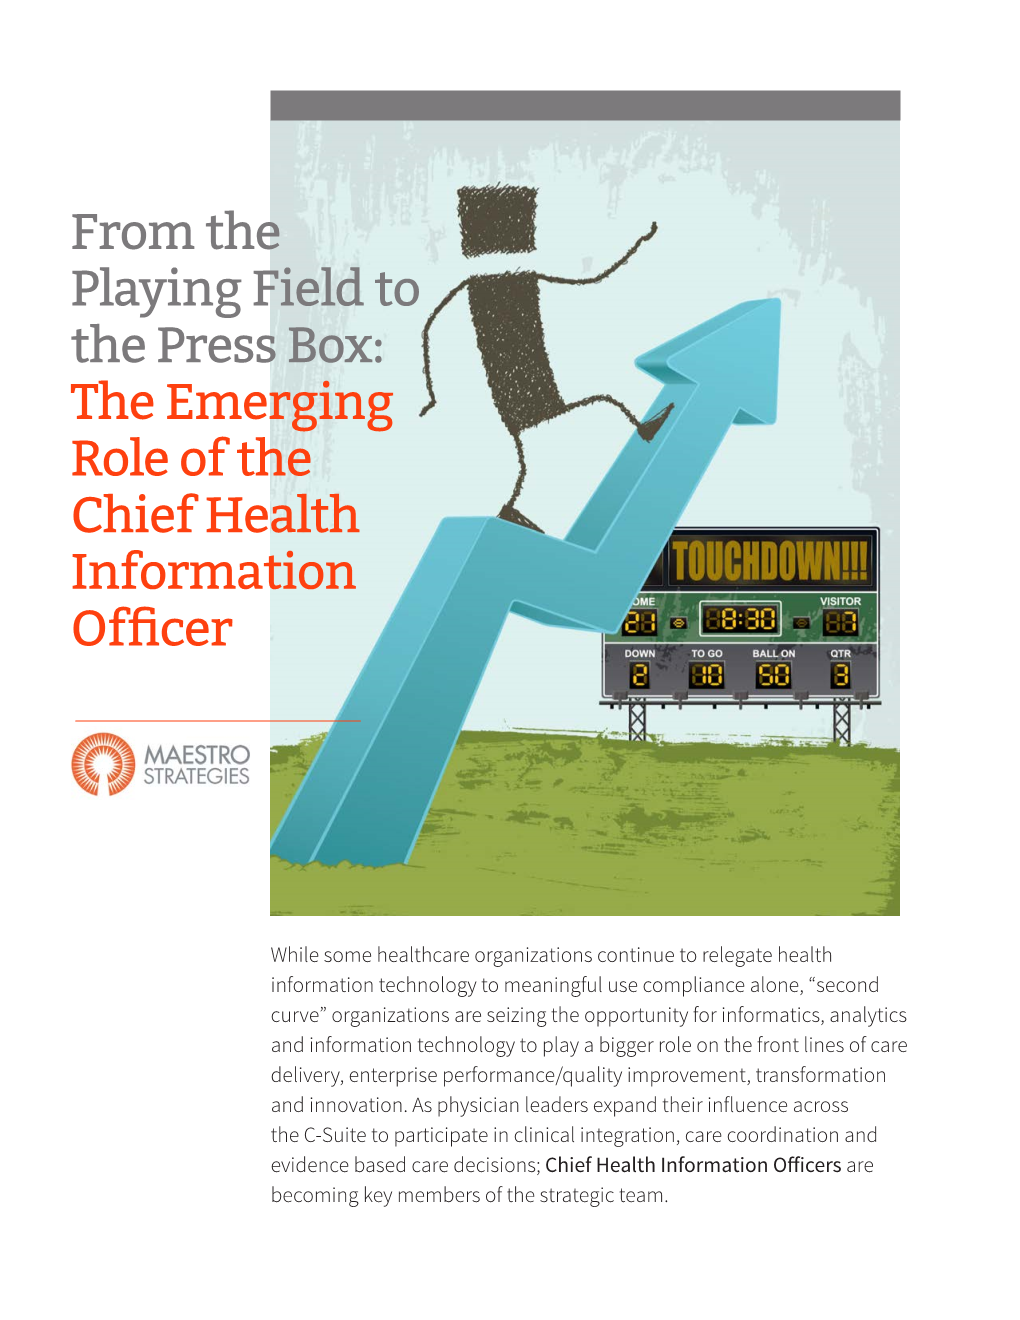 From the Playing Field to the Press Box: the Emerging Role of the Chief Health Information Officer